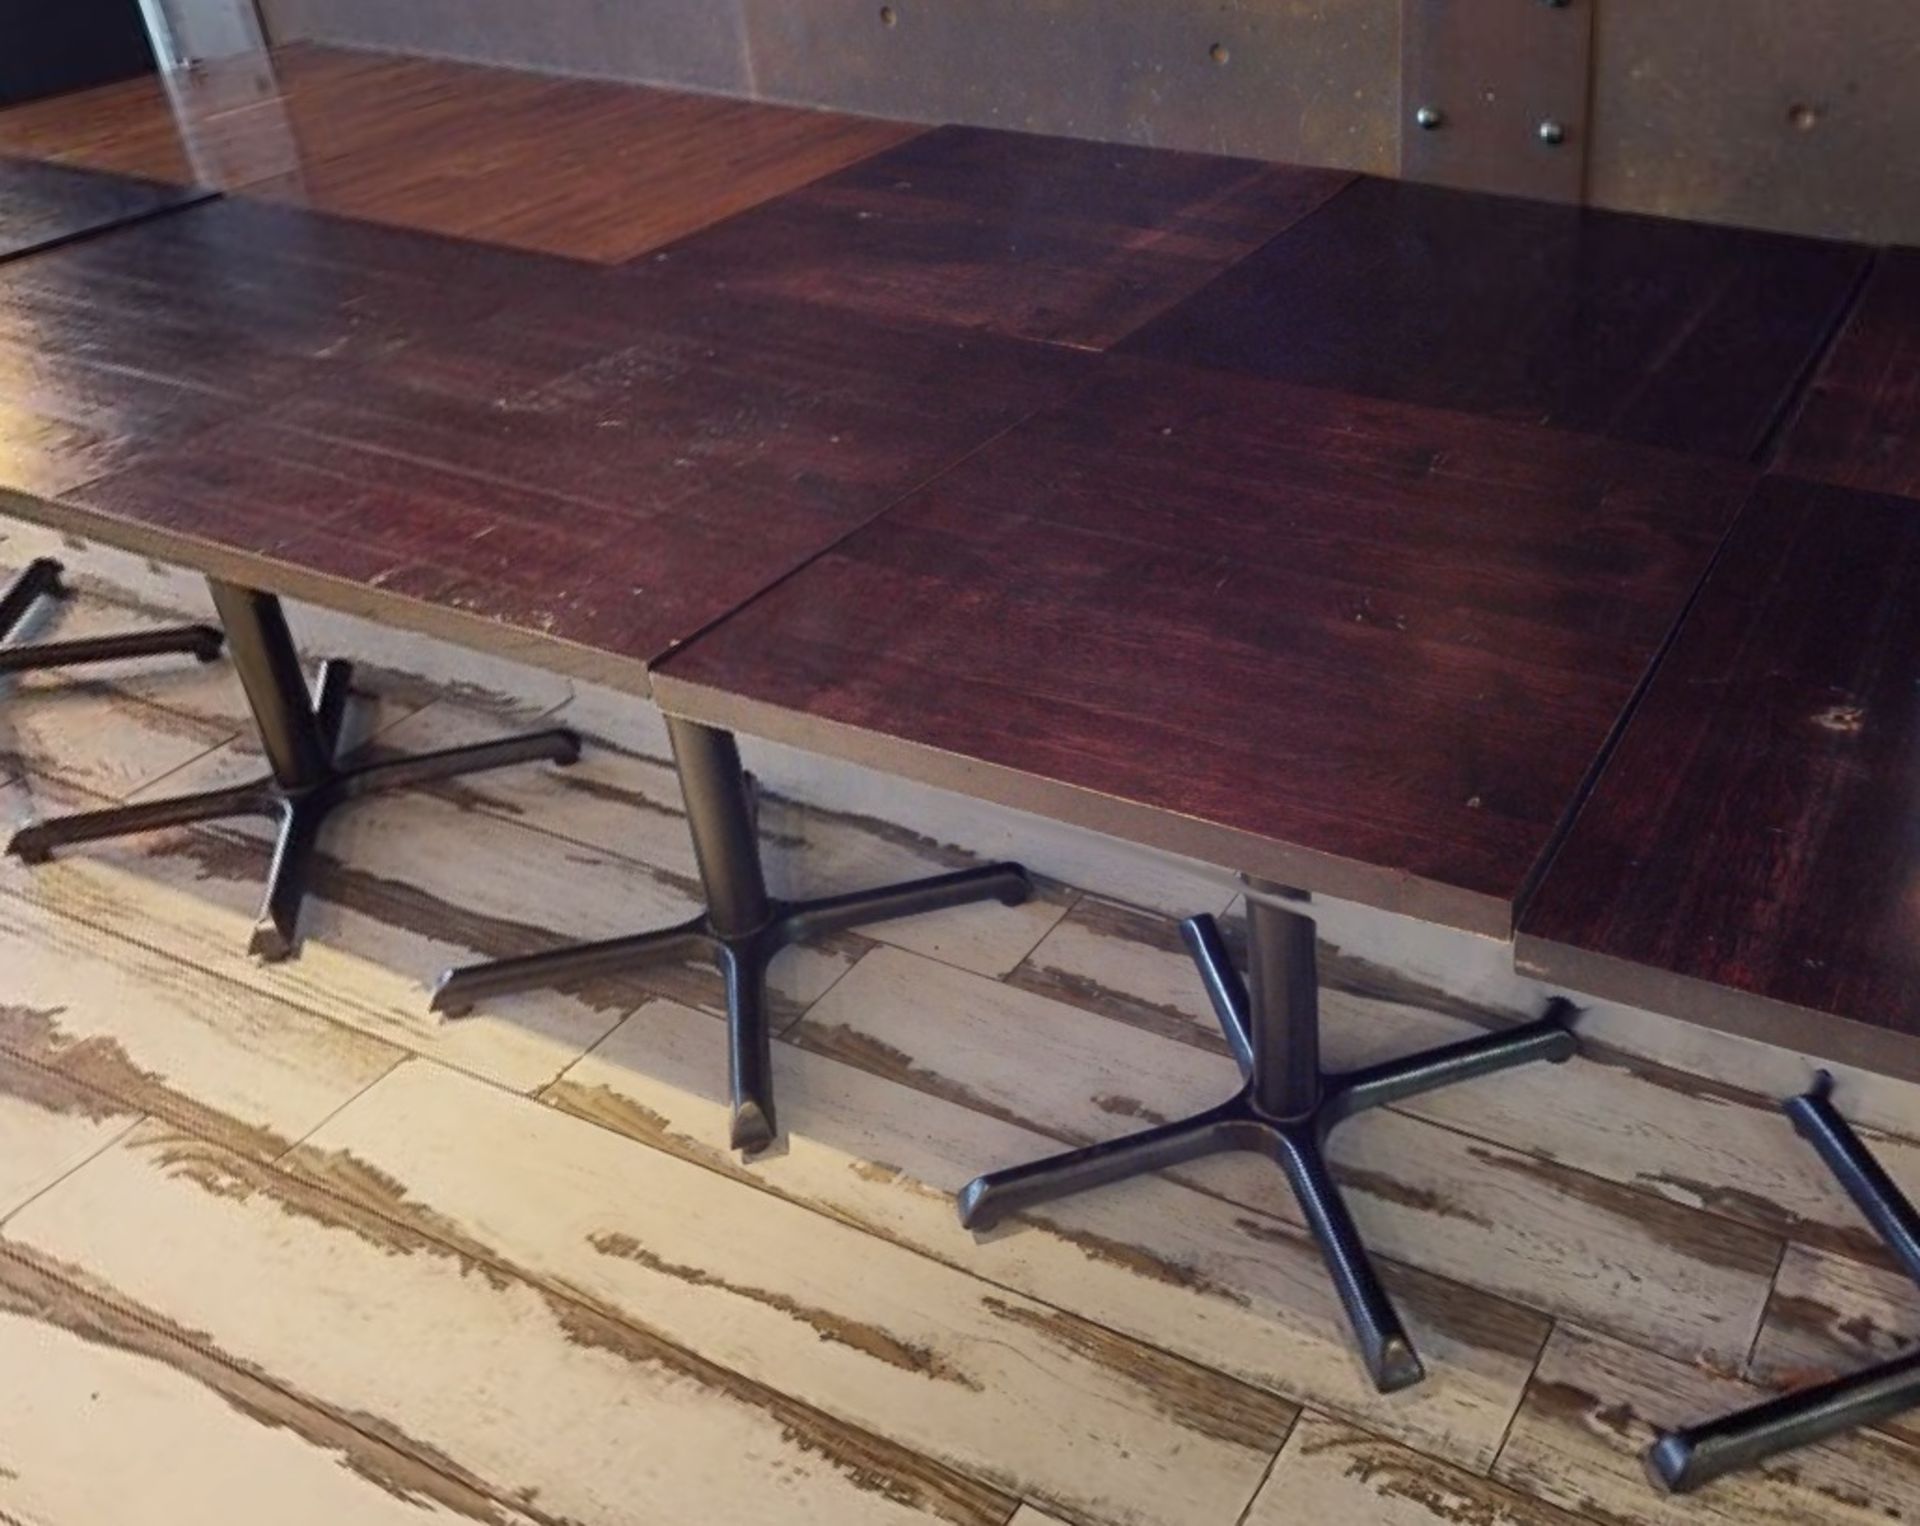 4 x Square Restaurant Tables With Dark Brown Wooden Tops and Cast Iron Bases - Image 3 of 3